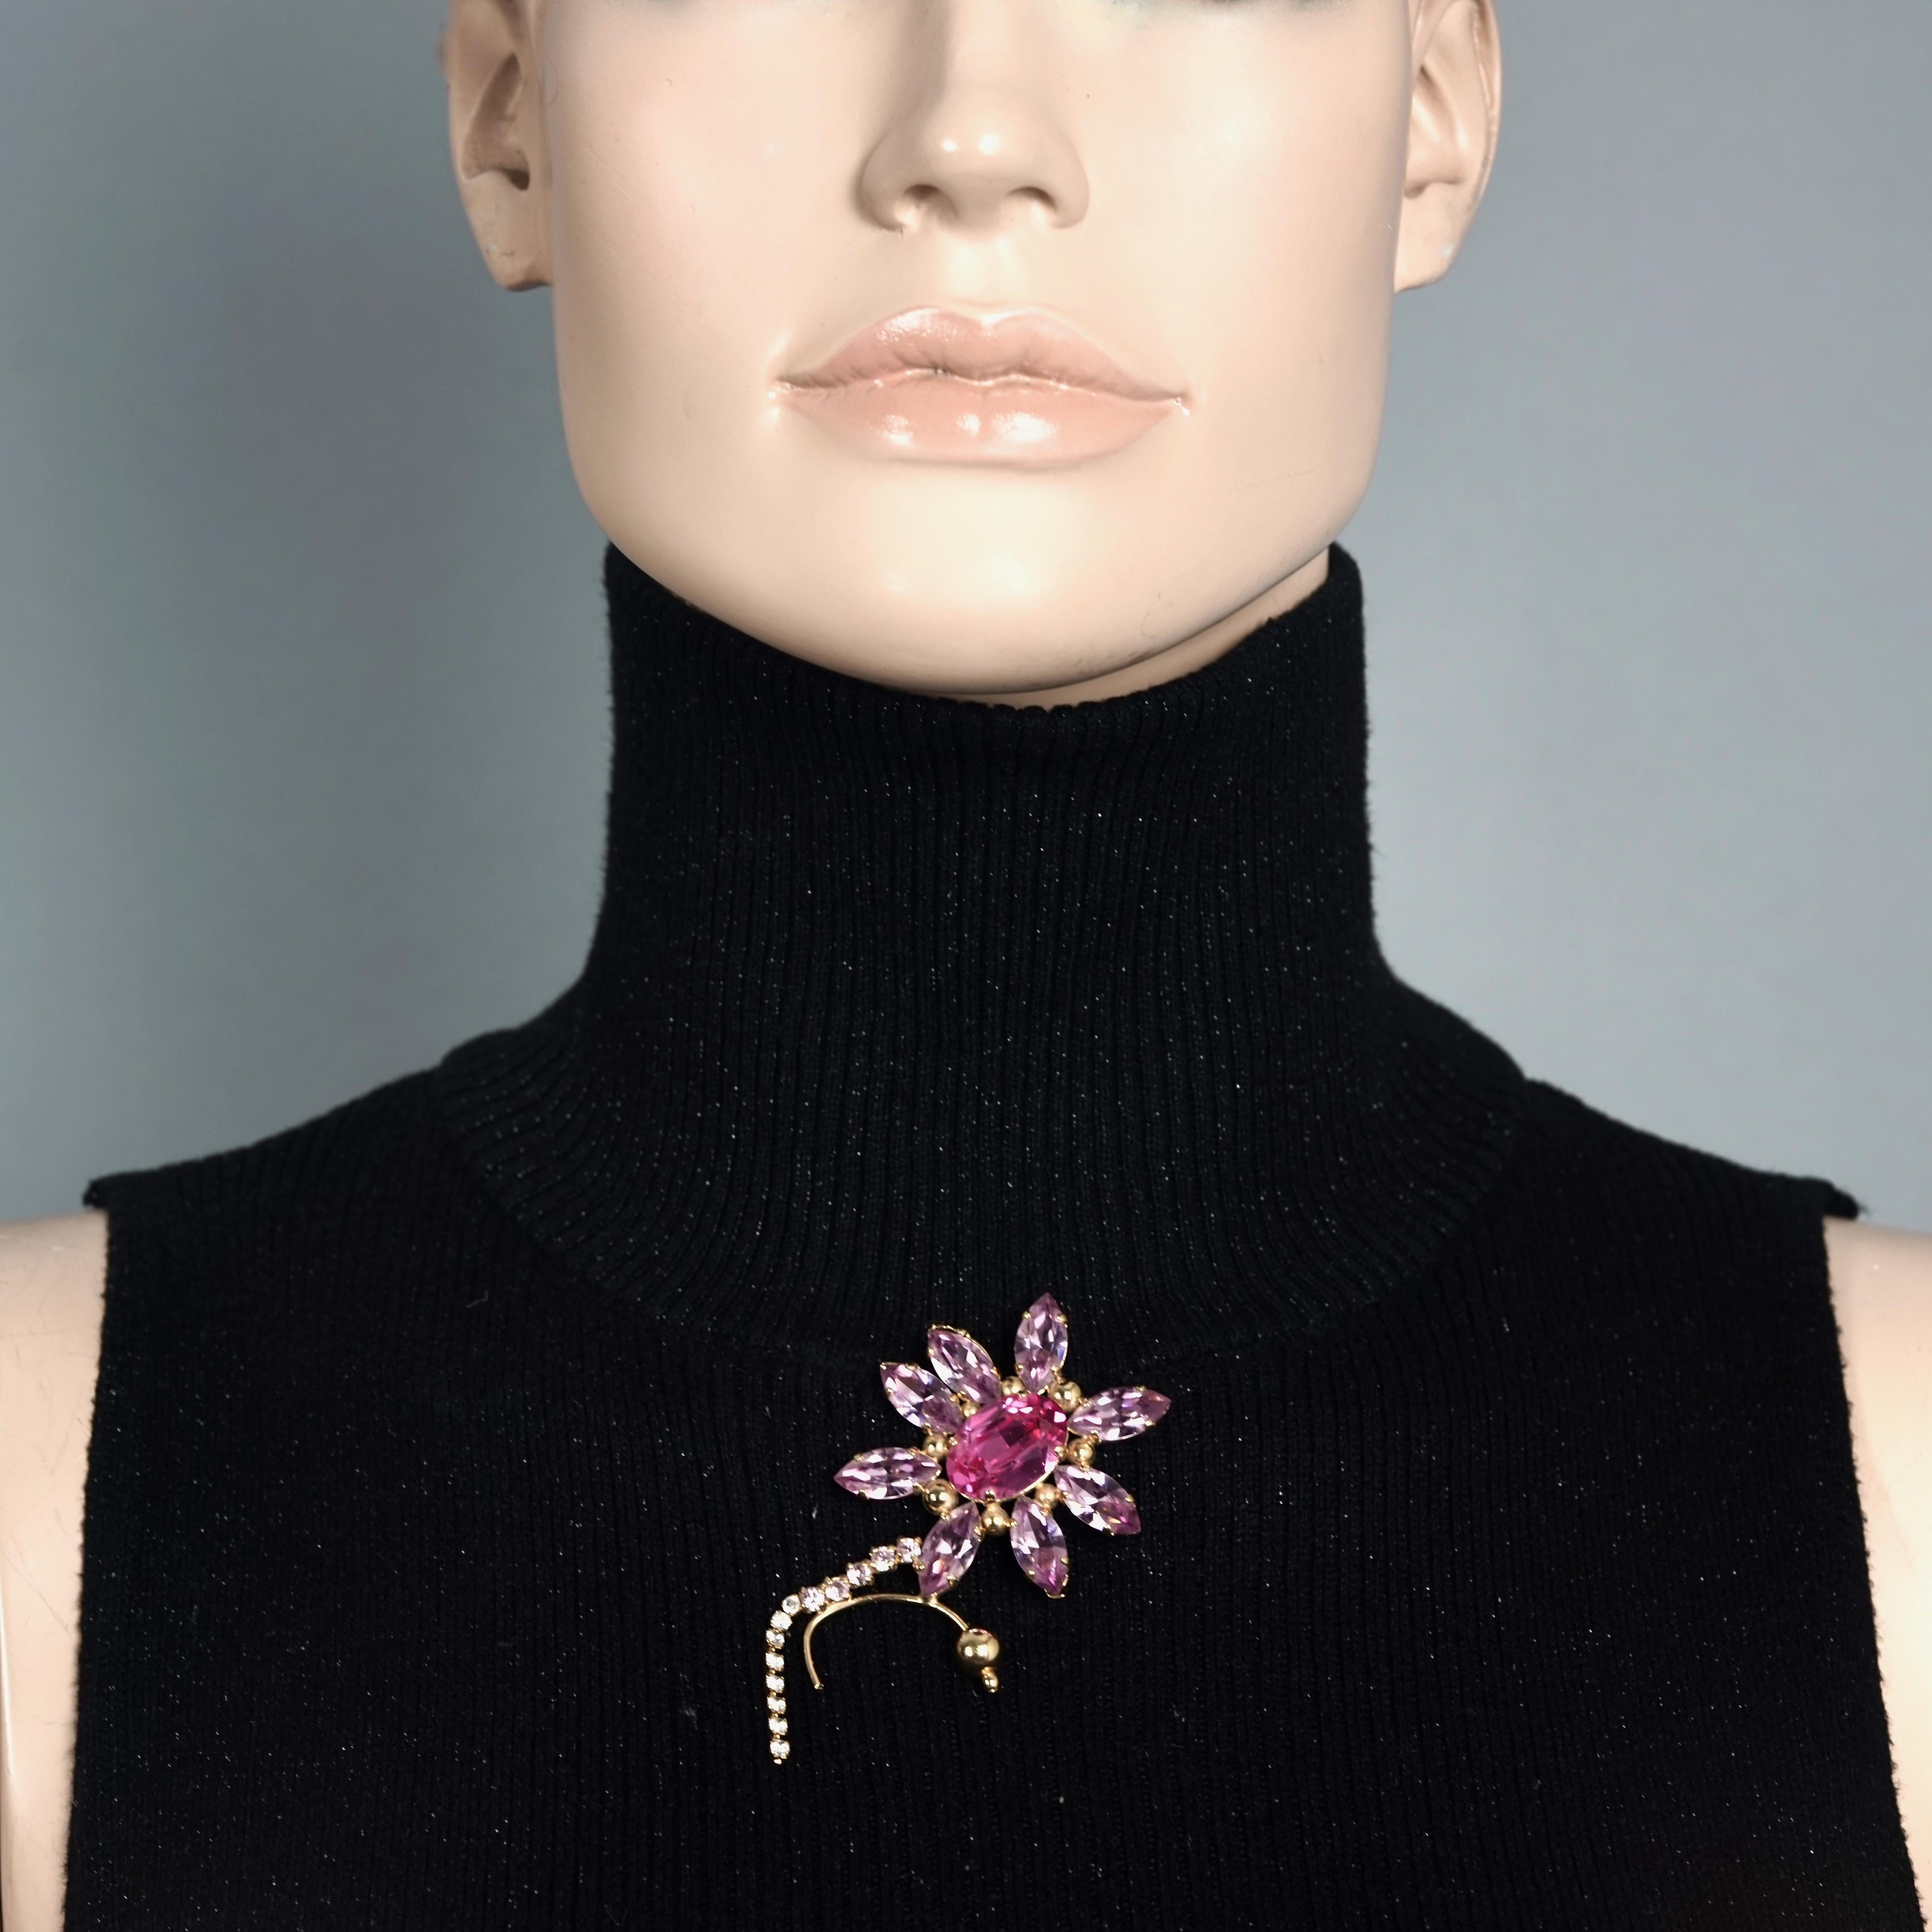 Vintage CHRISTIAN LACROIX Flower Rhinestone Articulated Brooch

Measurements:
Height: 3.15 inches (8 cm)
Width: 1.97 inches (5 cm)

Features:
- 100% Authentic CHRISTIAN LACROIX.
- Articulated pink and purple rhinestone brooch.
- Gold tone